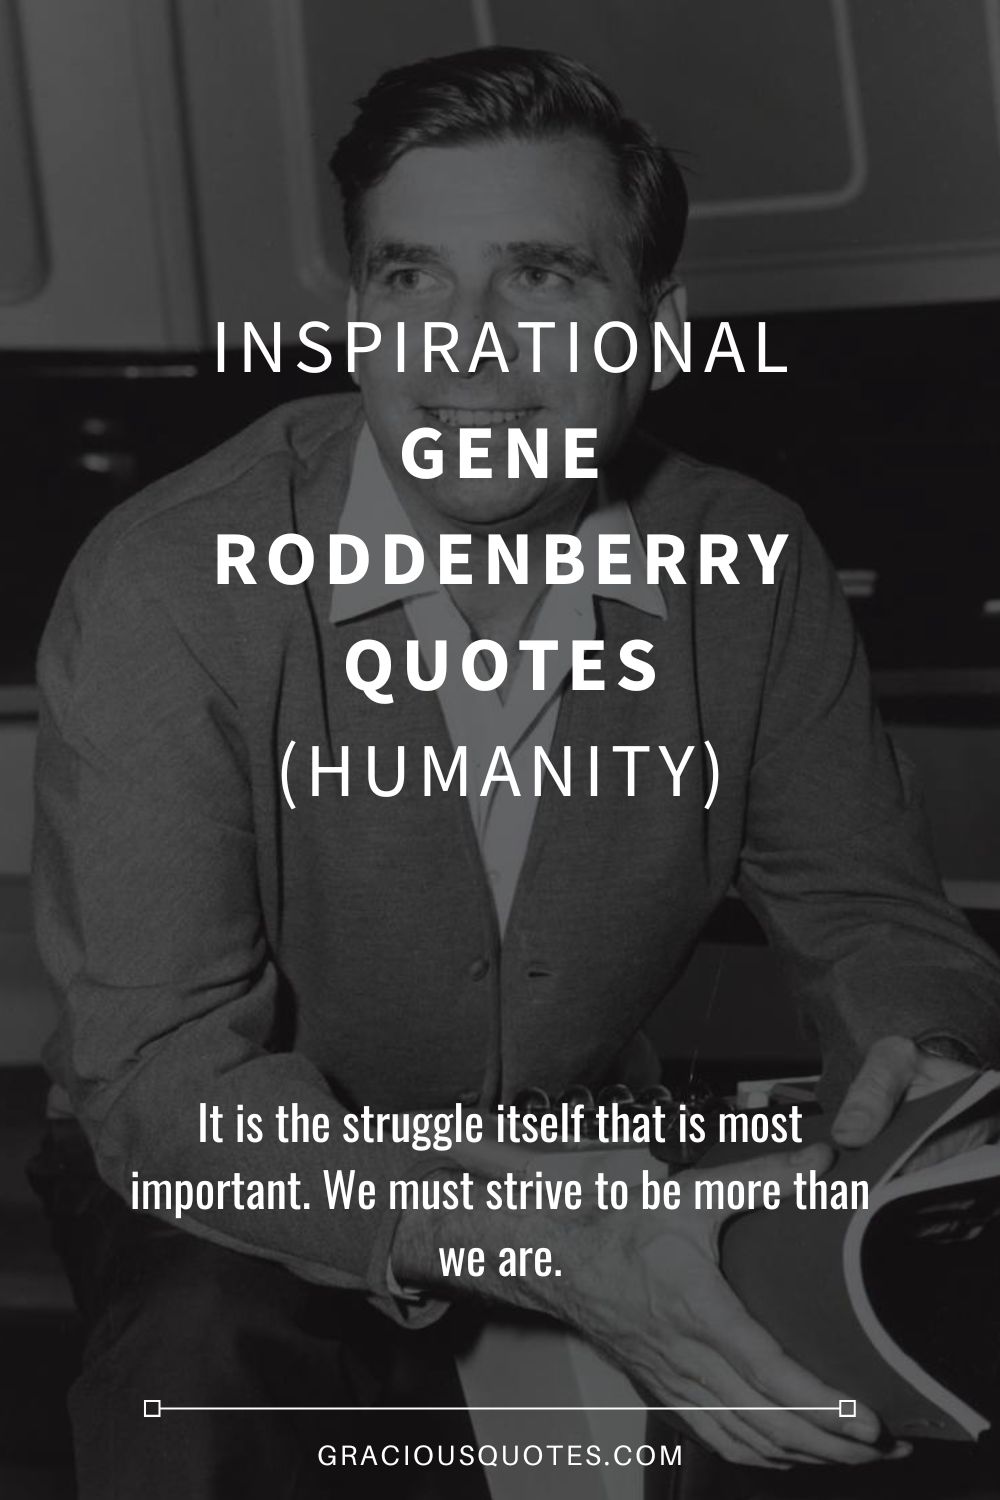 Inspirational Gene Roddenberry Quotes (HUMANITY) - Gracious Quotes